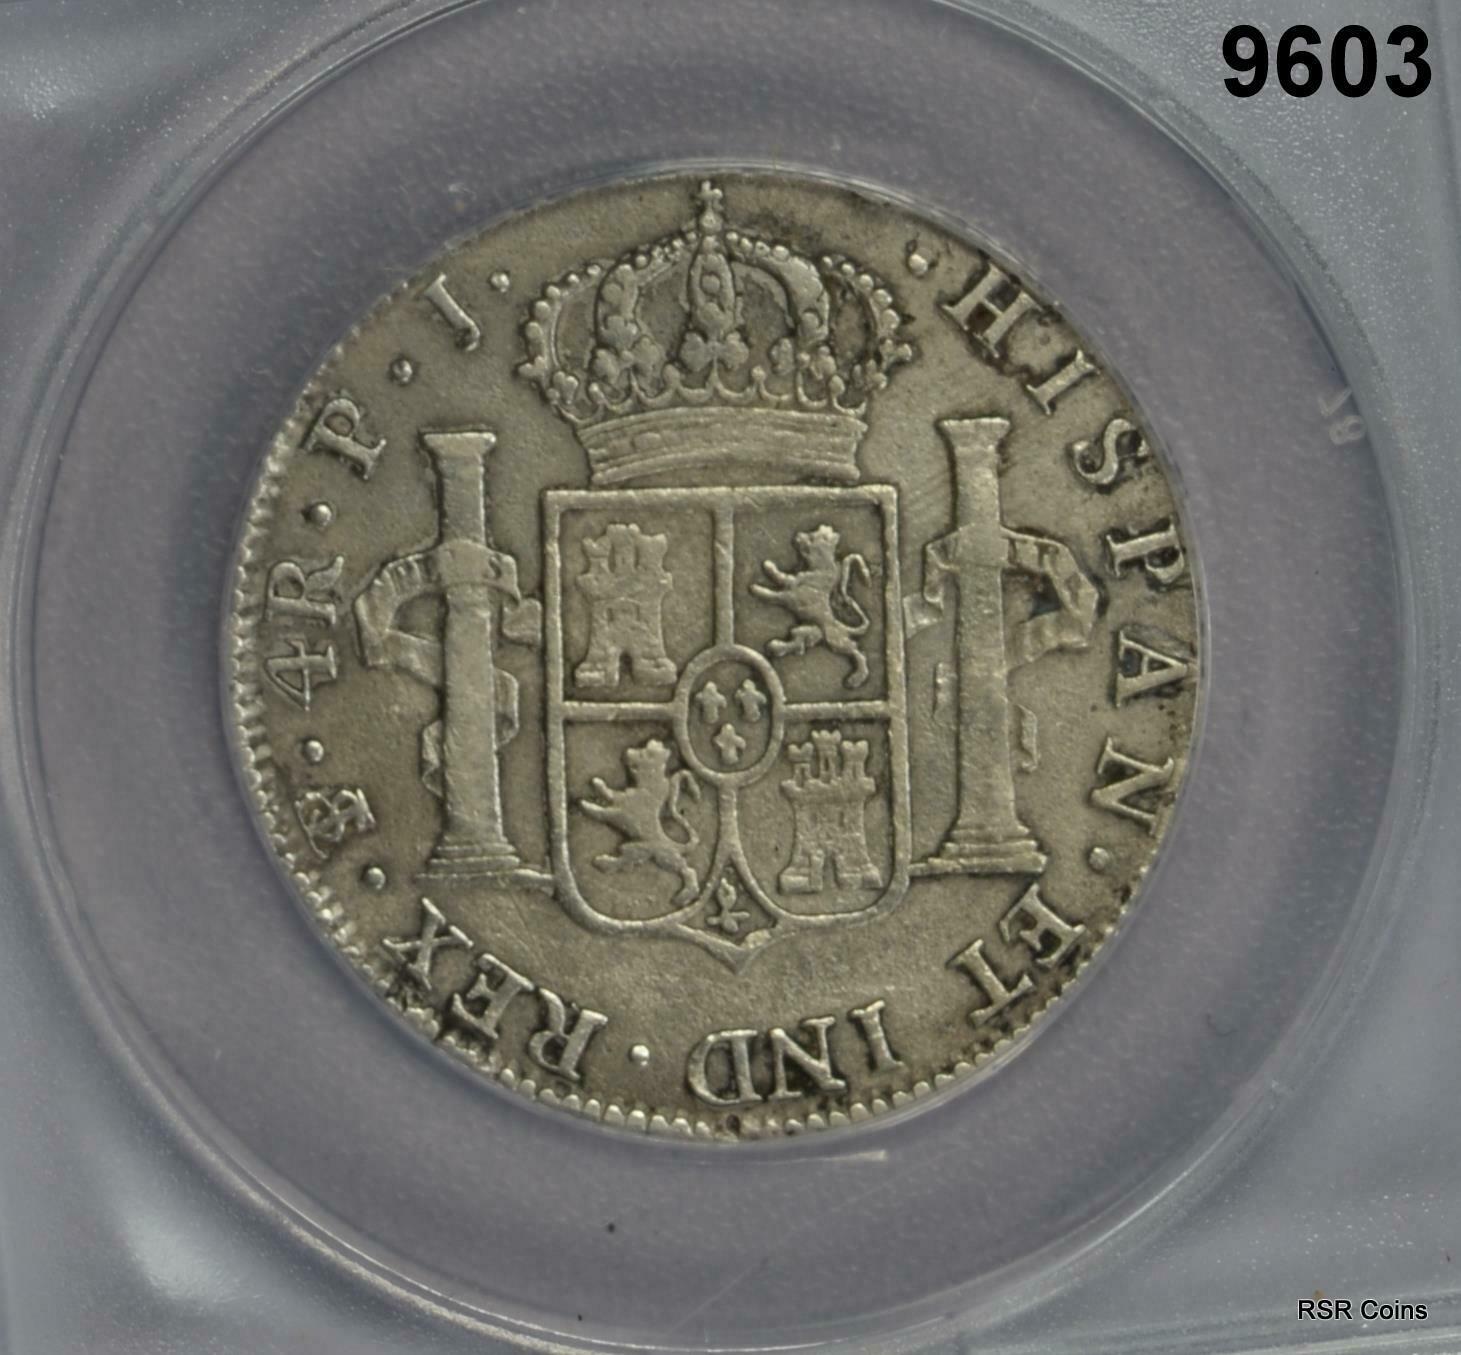 1823- P, PJ BOLIVIA 4 REAL ANACS CERTIFIED VF20 CORRODED #9603